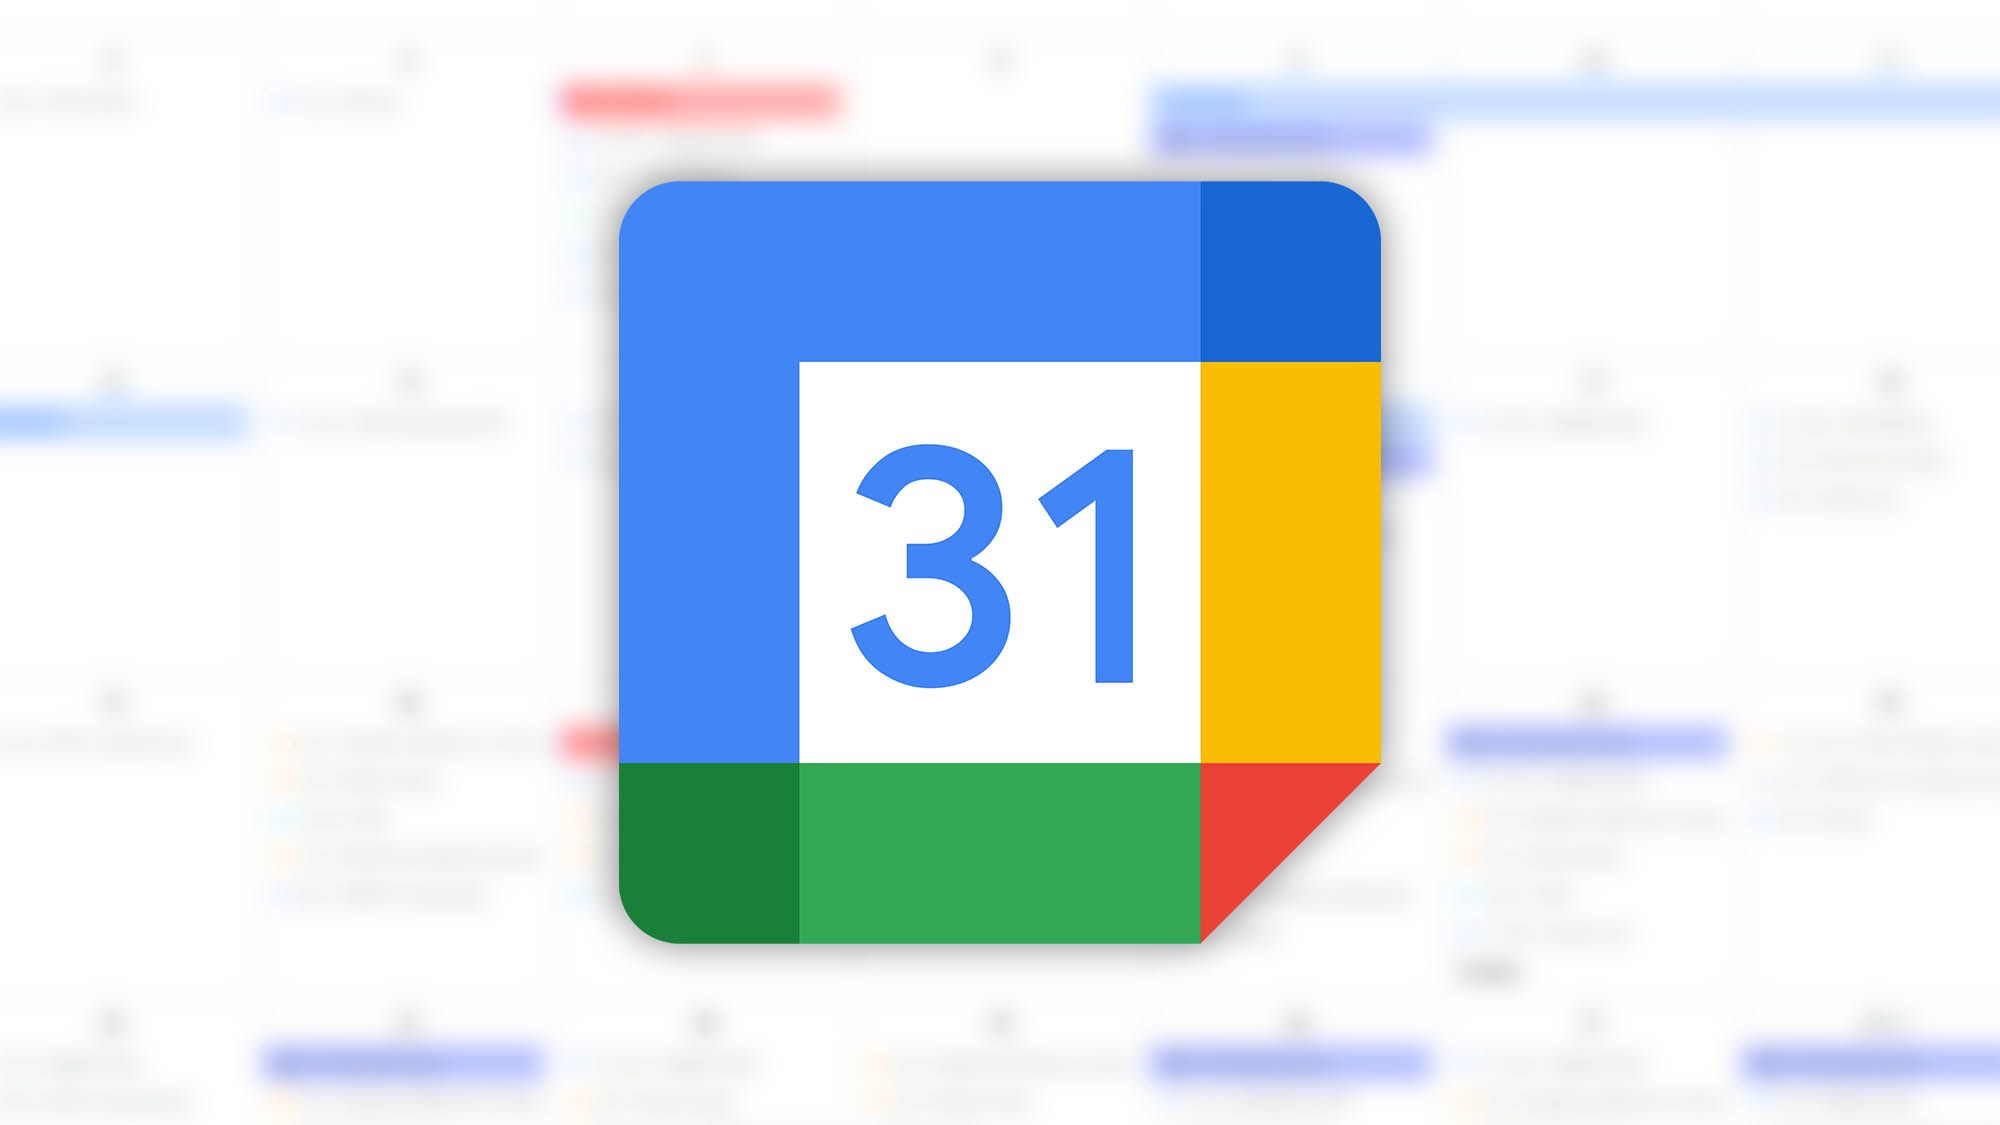 Google Calendar will now let you hide selected holidays